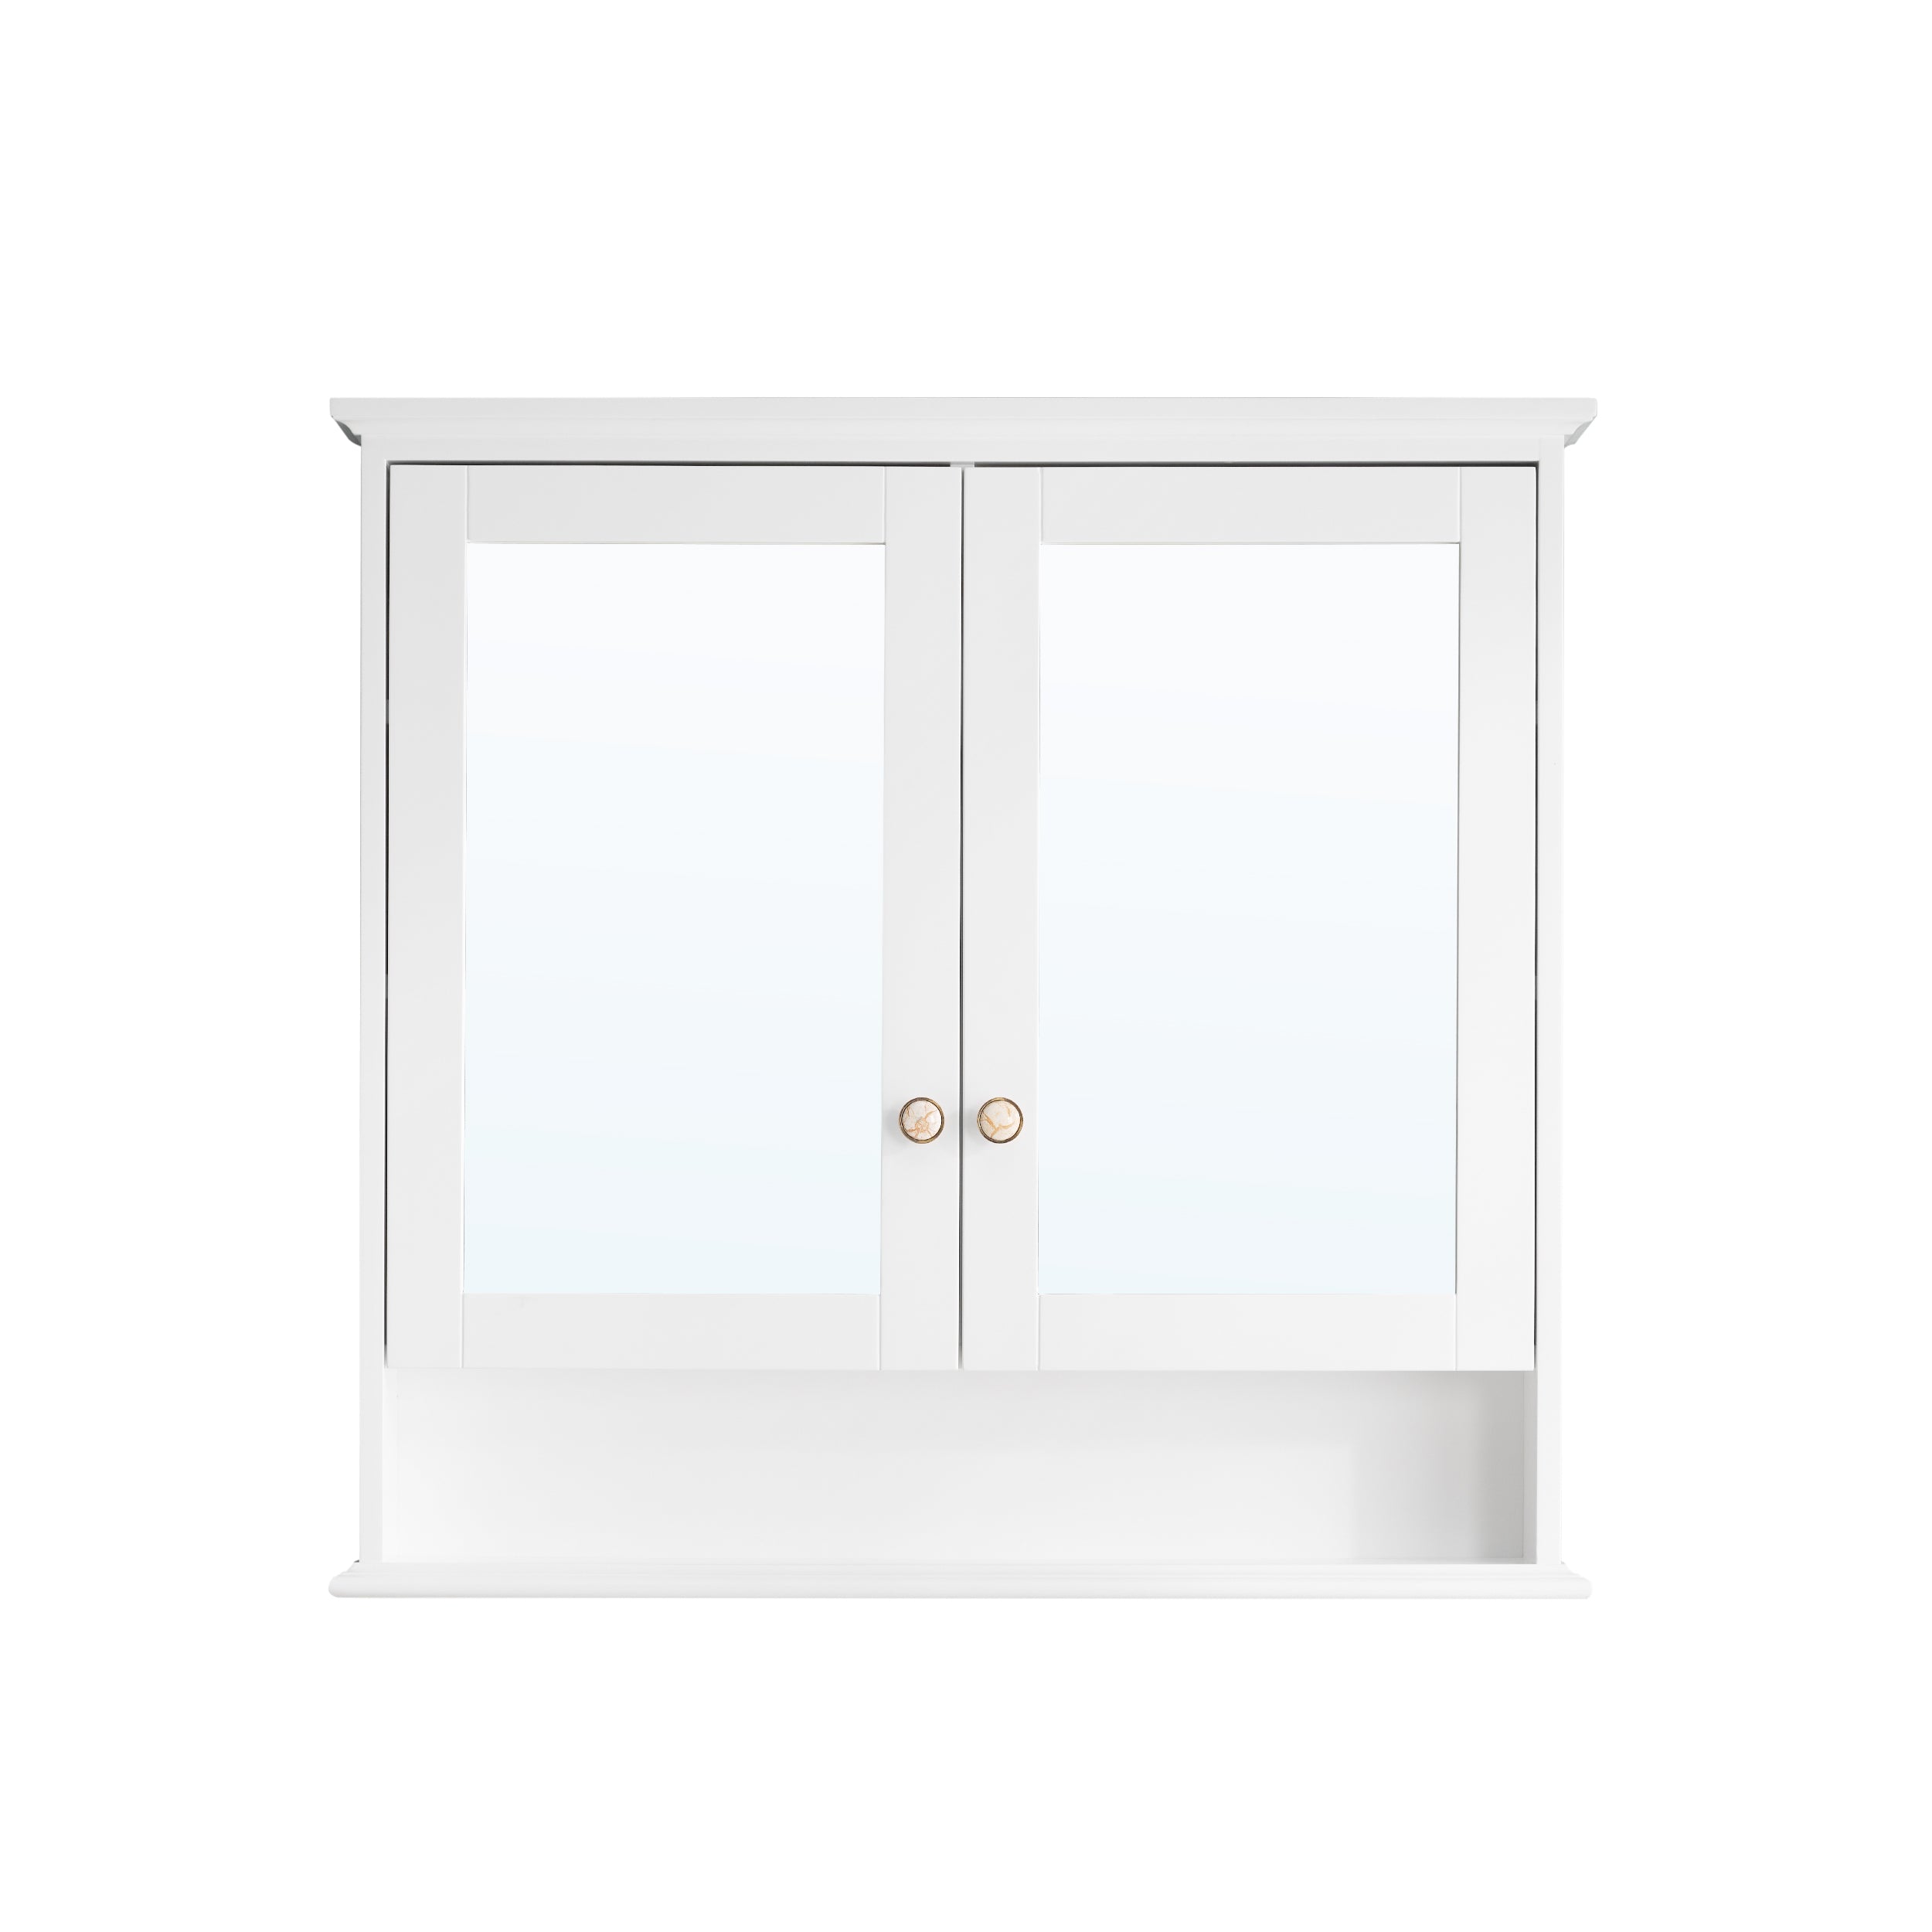 36 in.W x 34 in.H Surface-Mount Bathroom Medicine Cabinet with Mirror in White